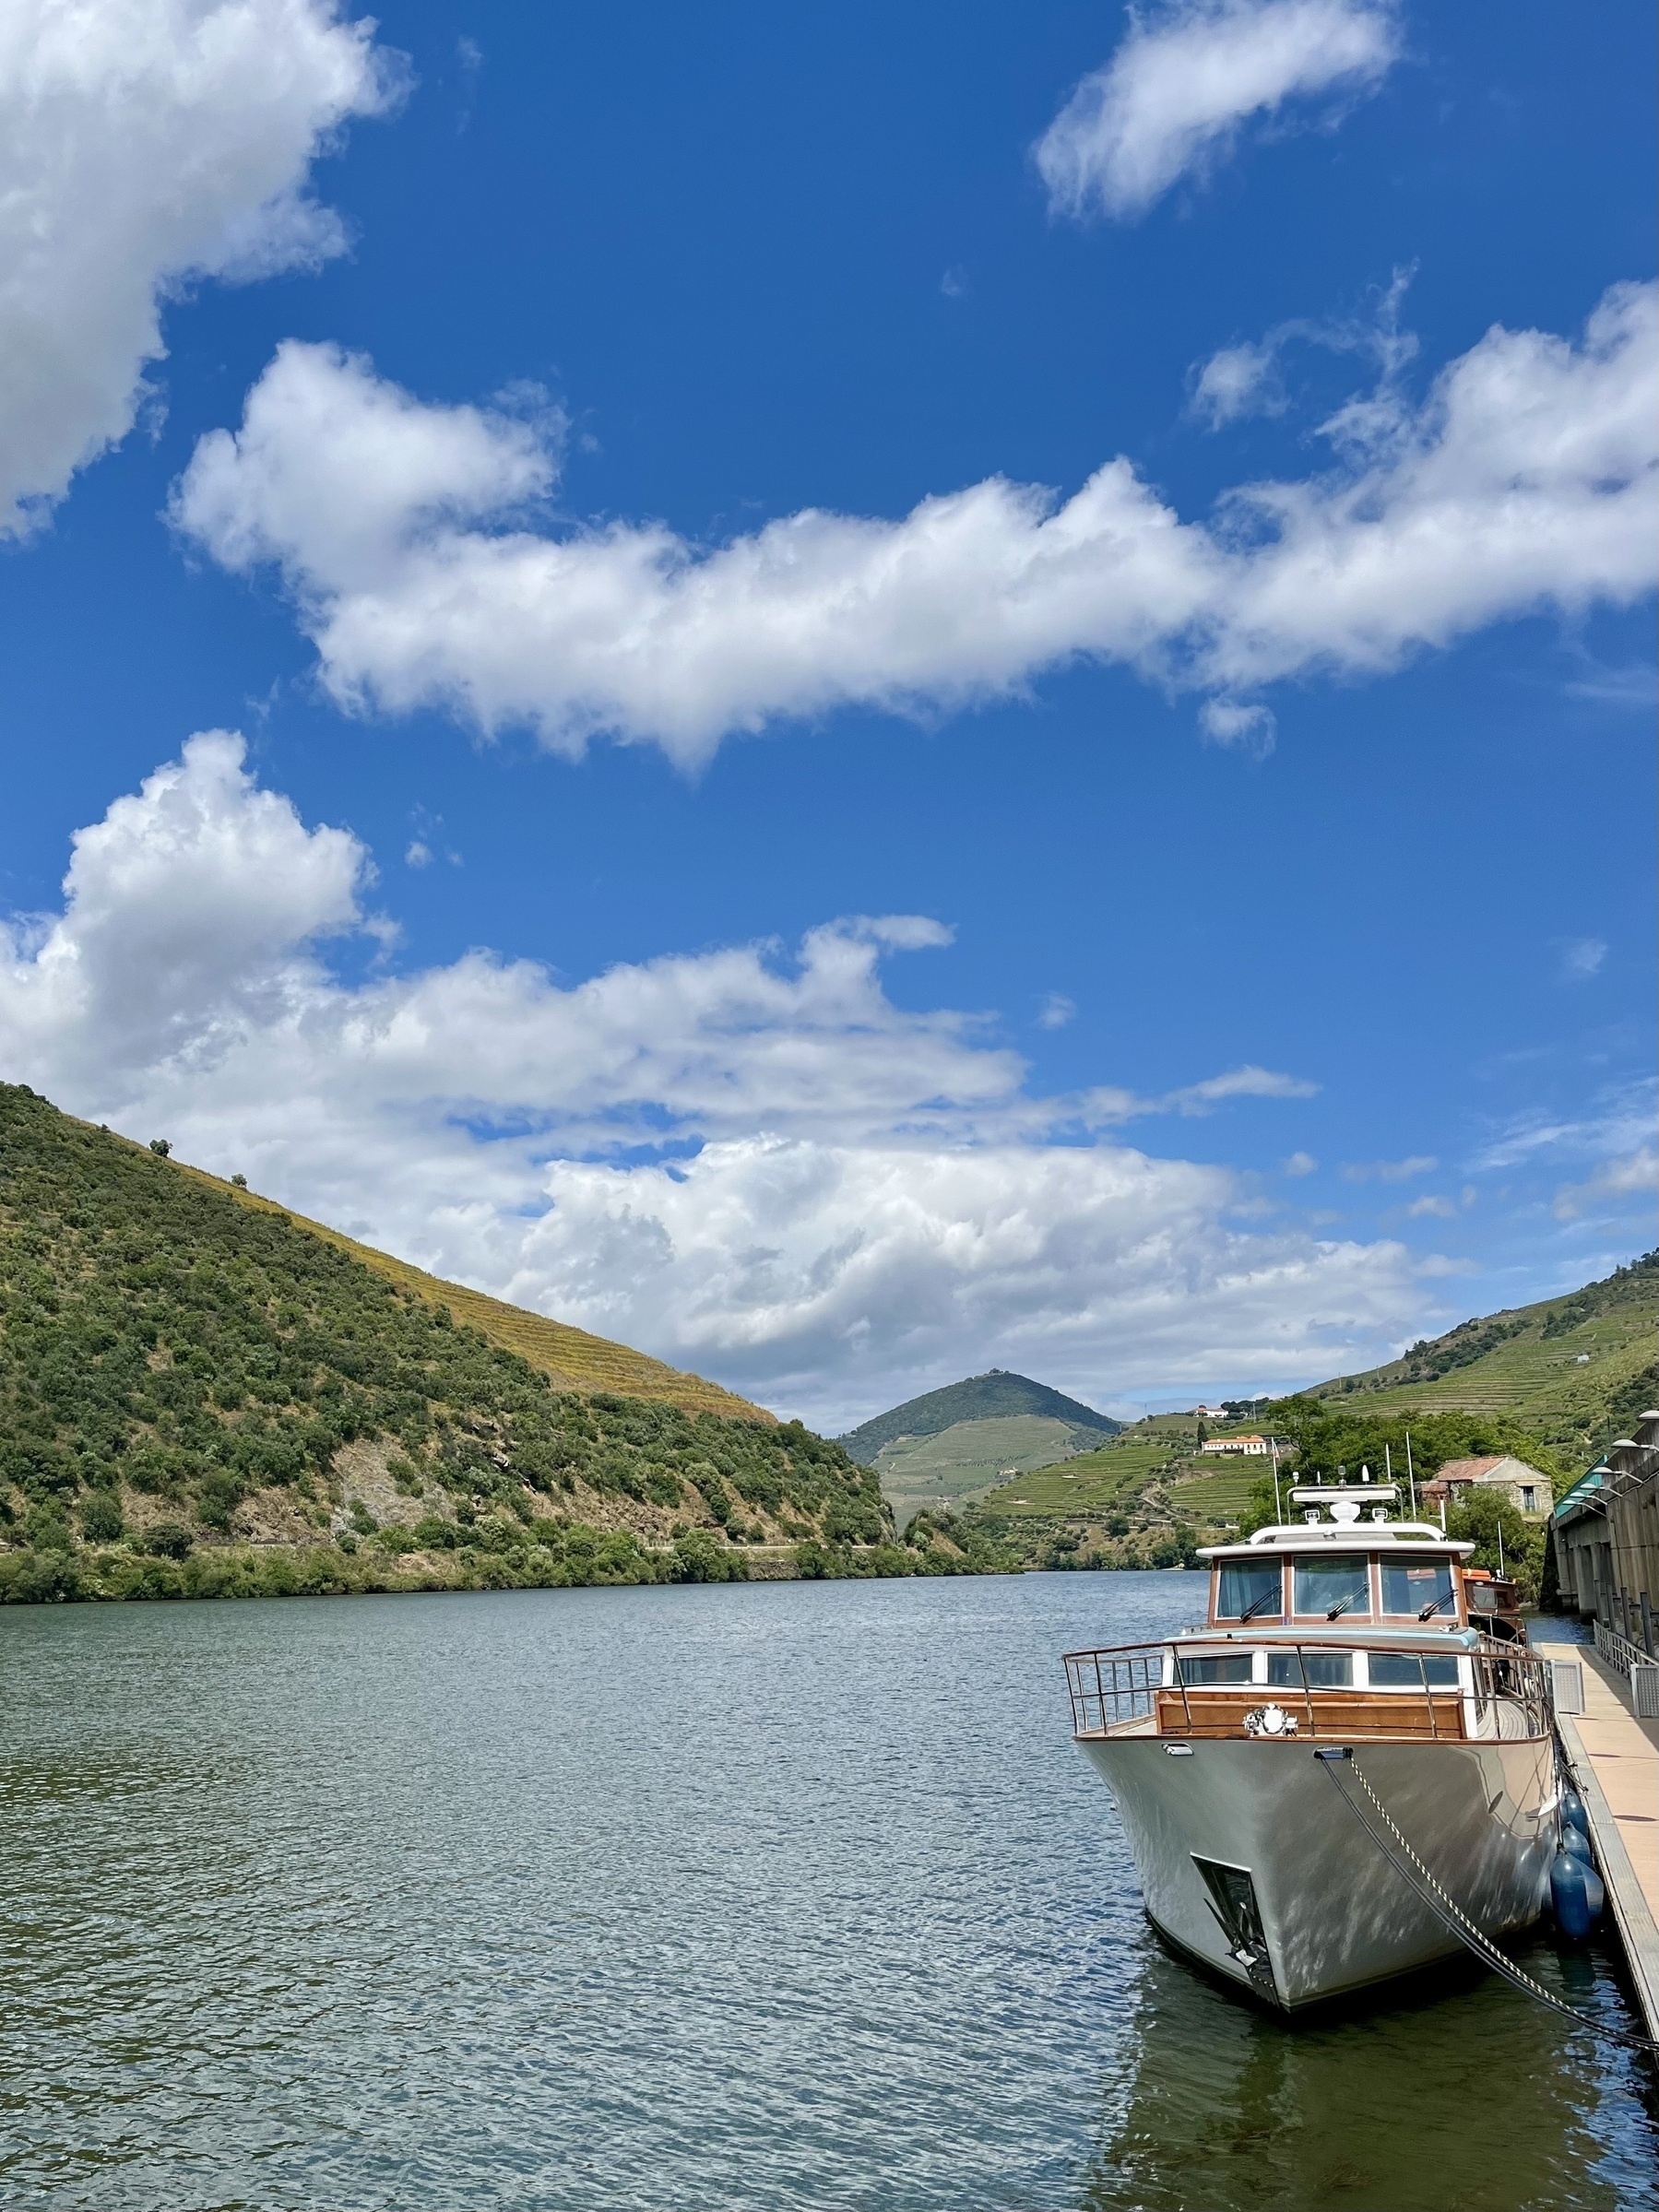 A boat moored by a river, with green hills in the background under a blue sky dotted with fluffy clouds.